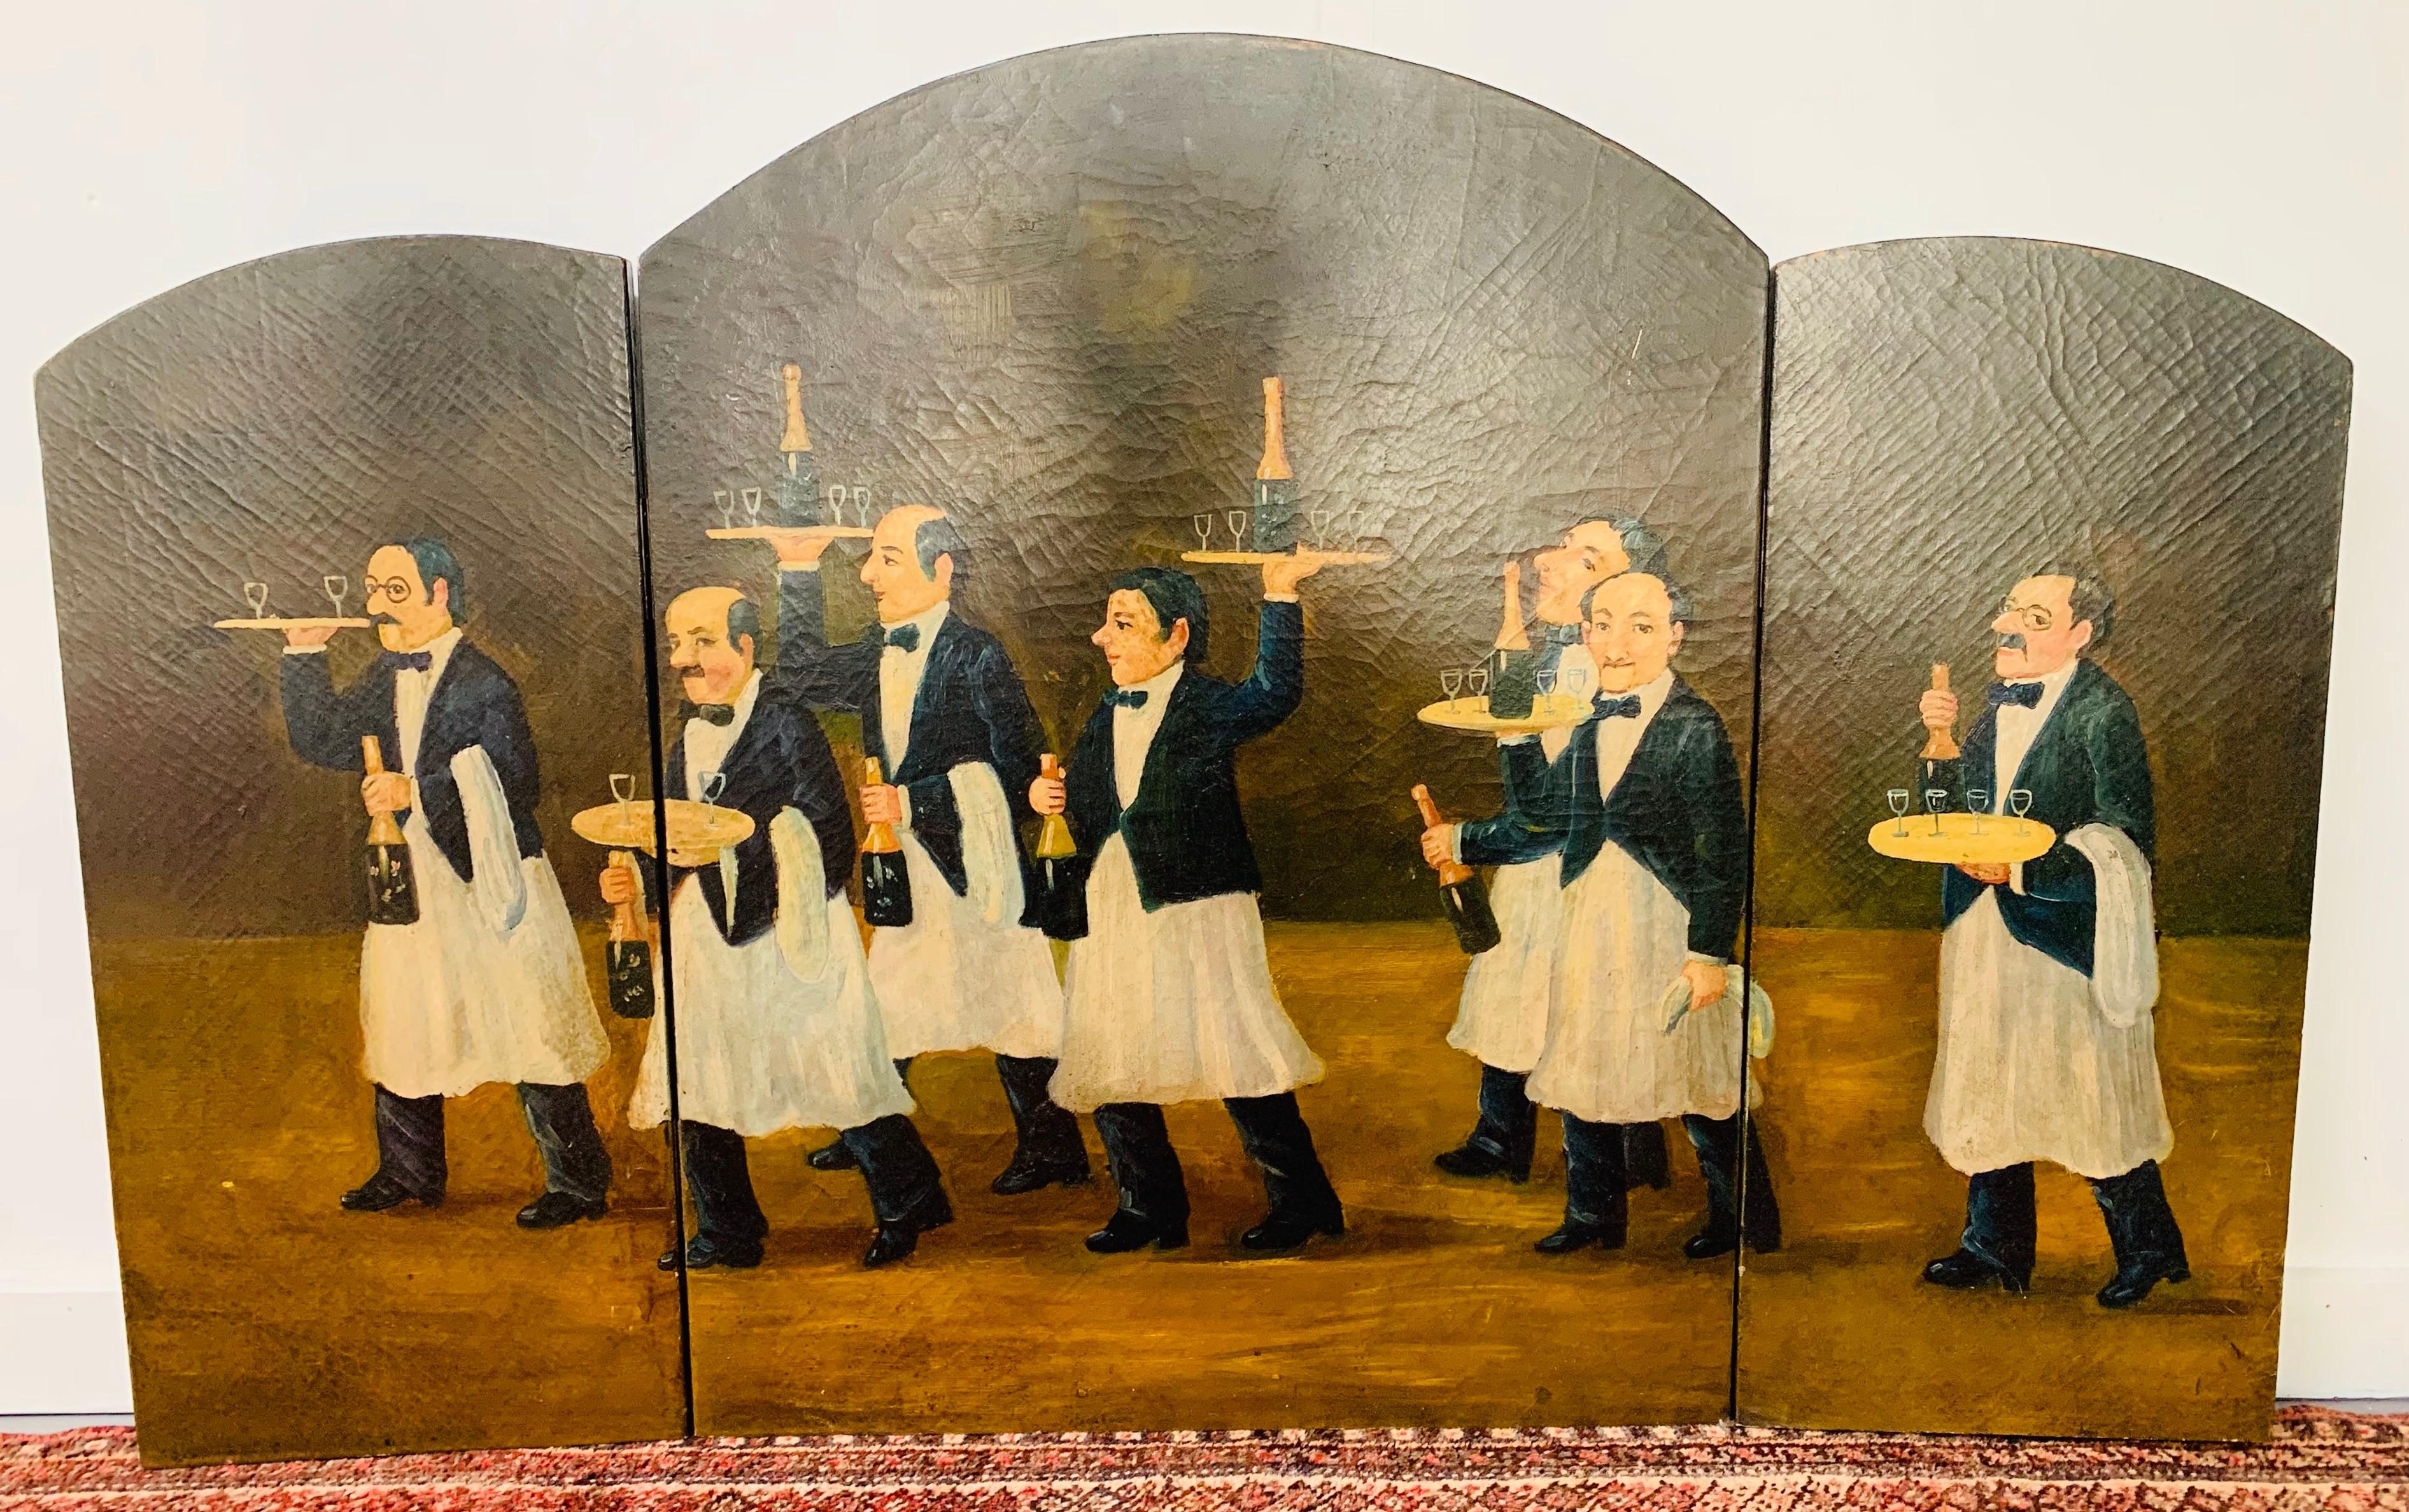 This lovely three panel folding fireplace screen is hand painted on wood. The screen features a scene of a group of men waiters in a high-end Steak House or restaurant serving bottles of champagne. 

This screen will definitely set the mood in